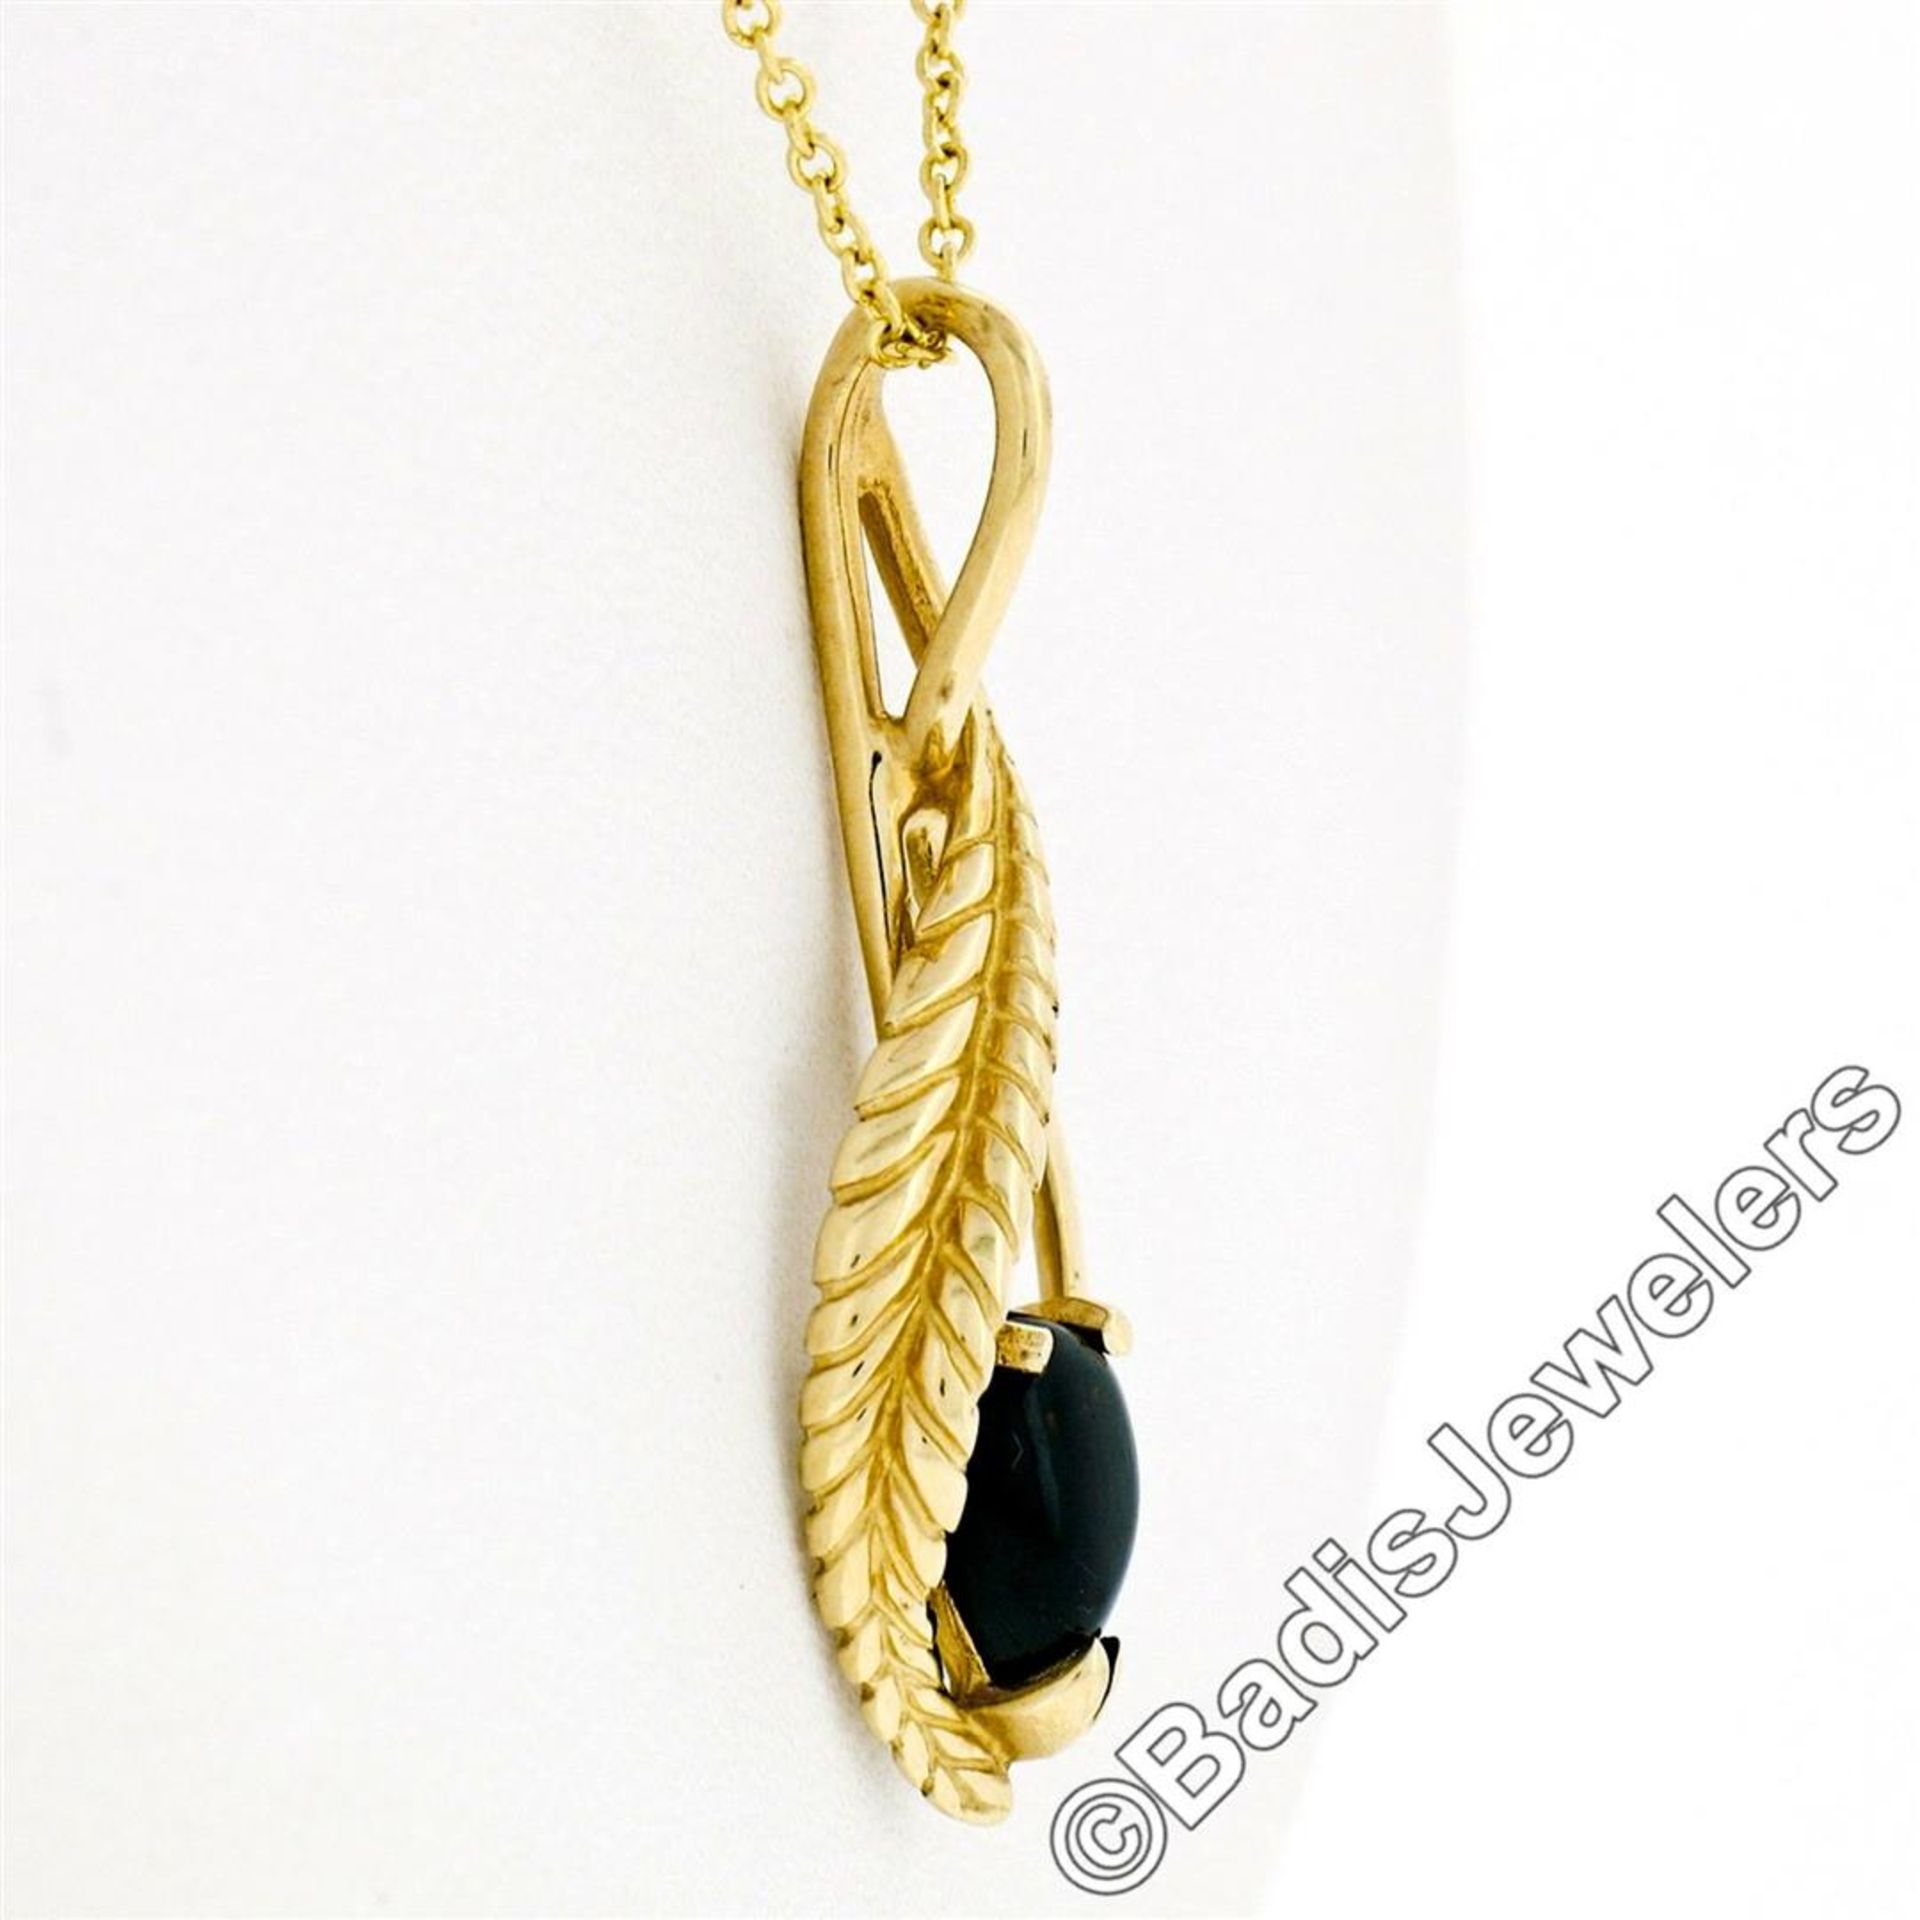 14kt Yellow Gold Pear Cabochon Black Onyx Open Pendant Necklace - Image 5 of 7